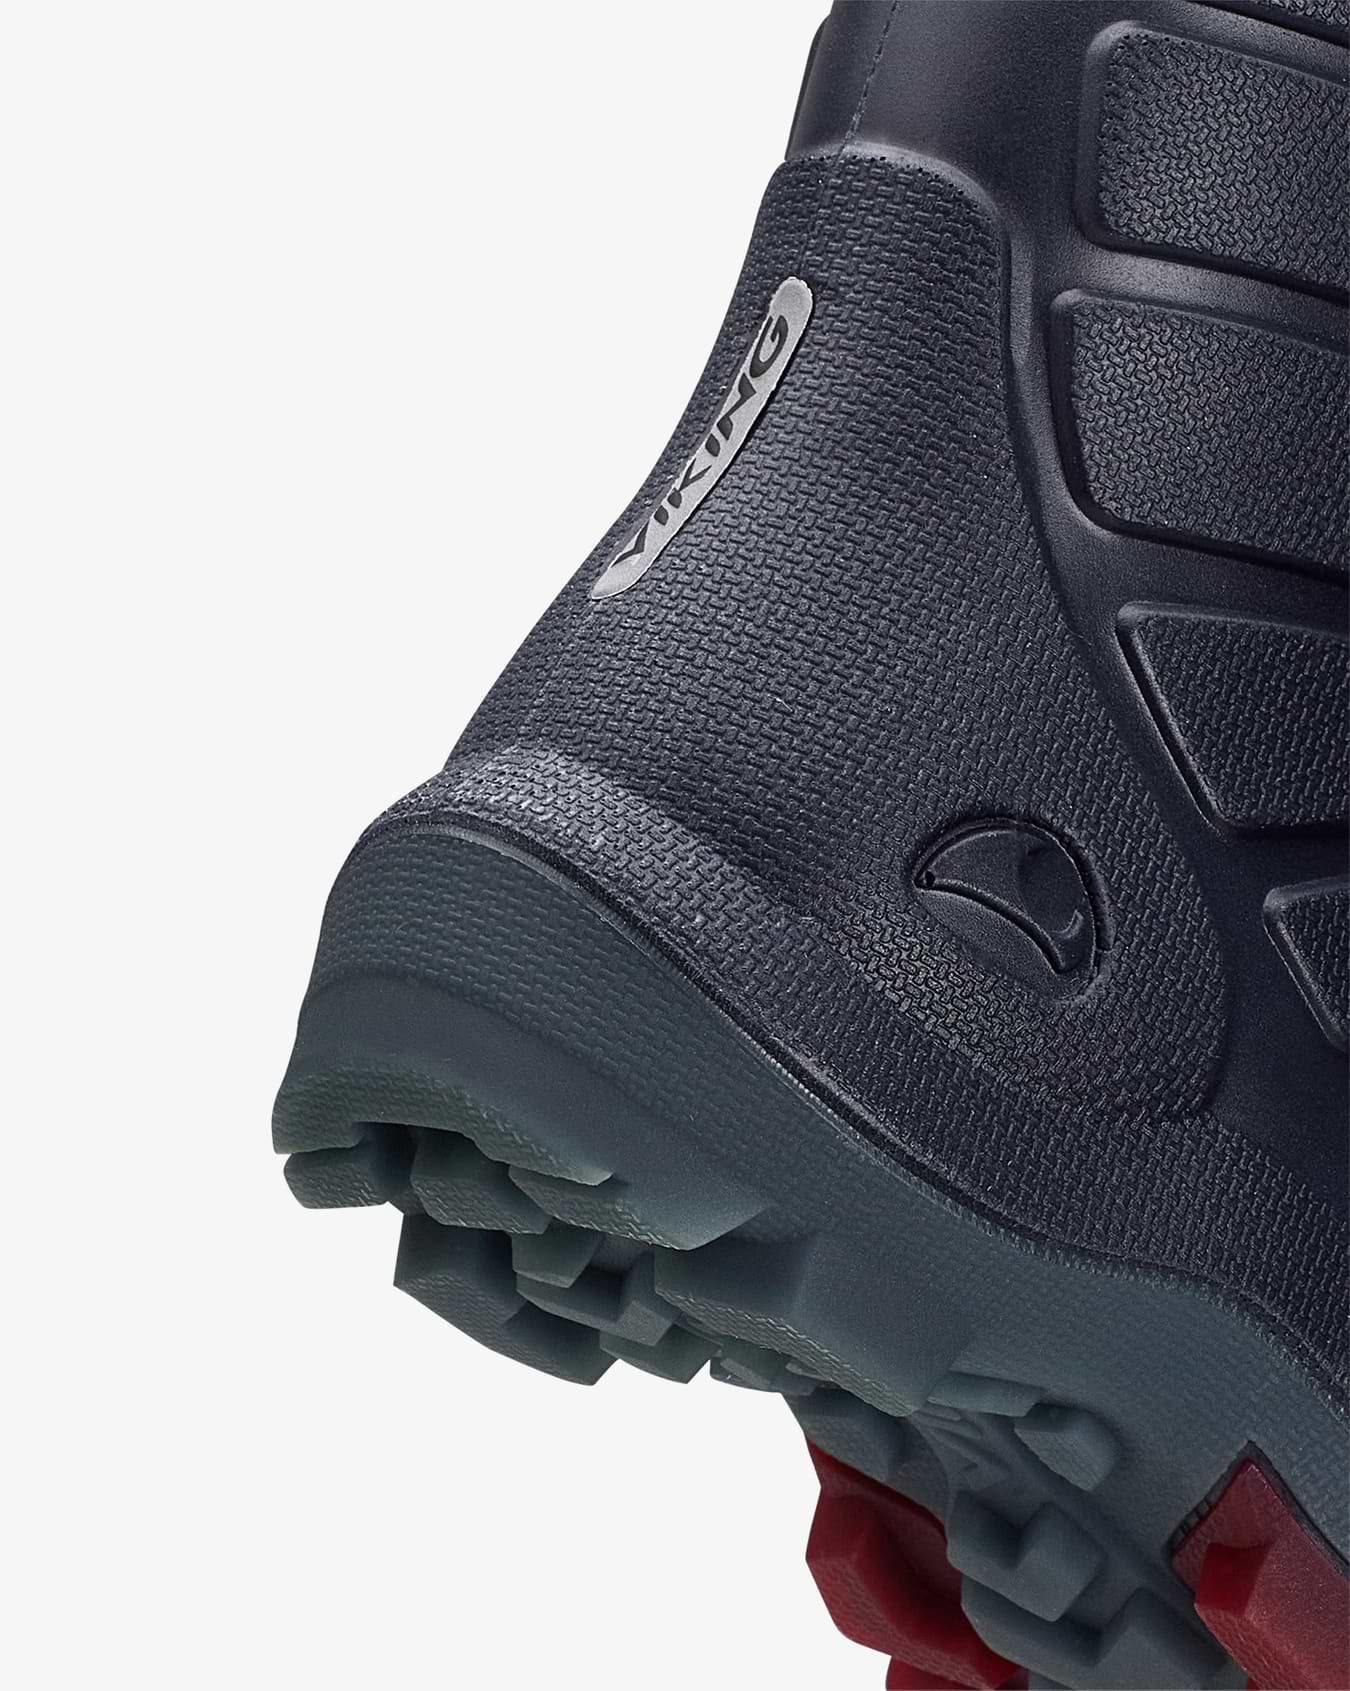 Extreme Warm Navy/Dark Red Thermo Boot